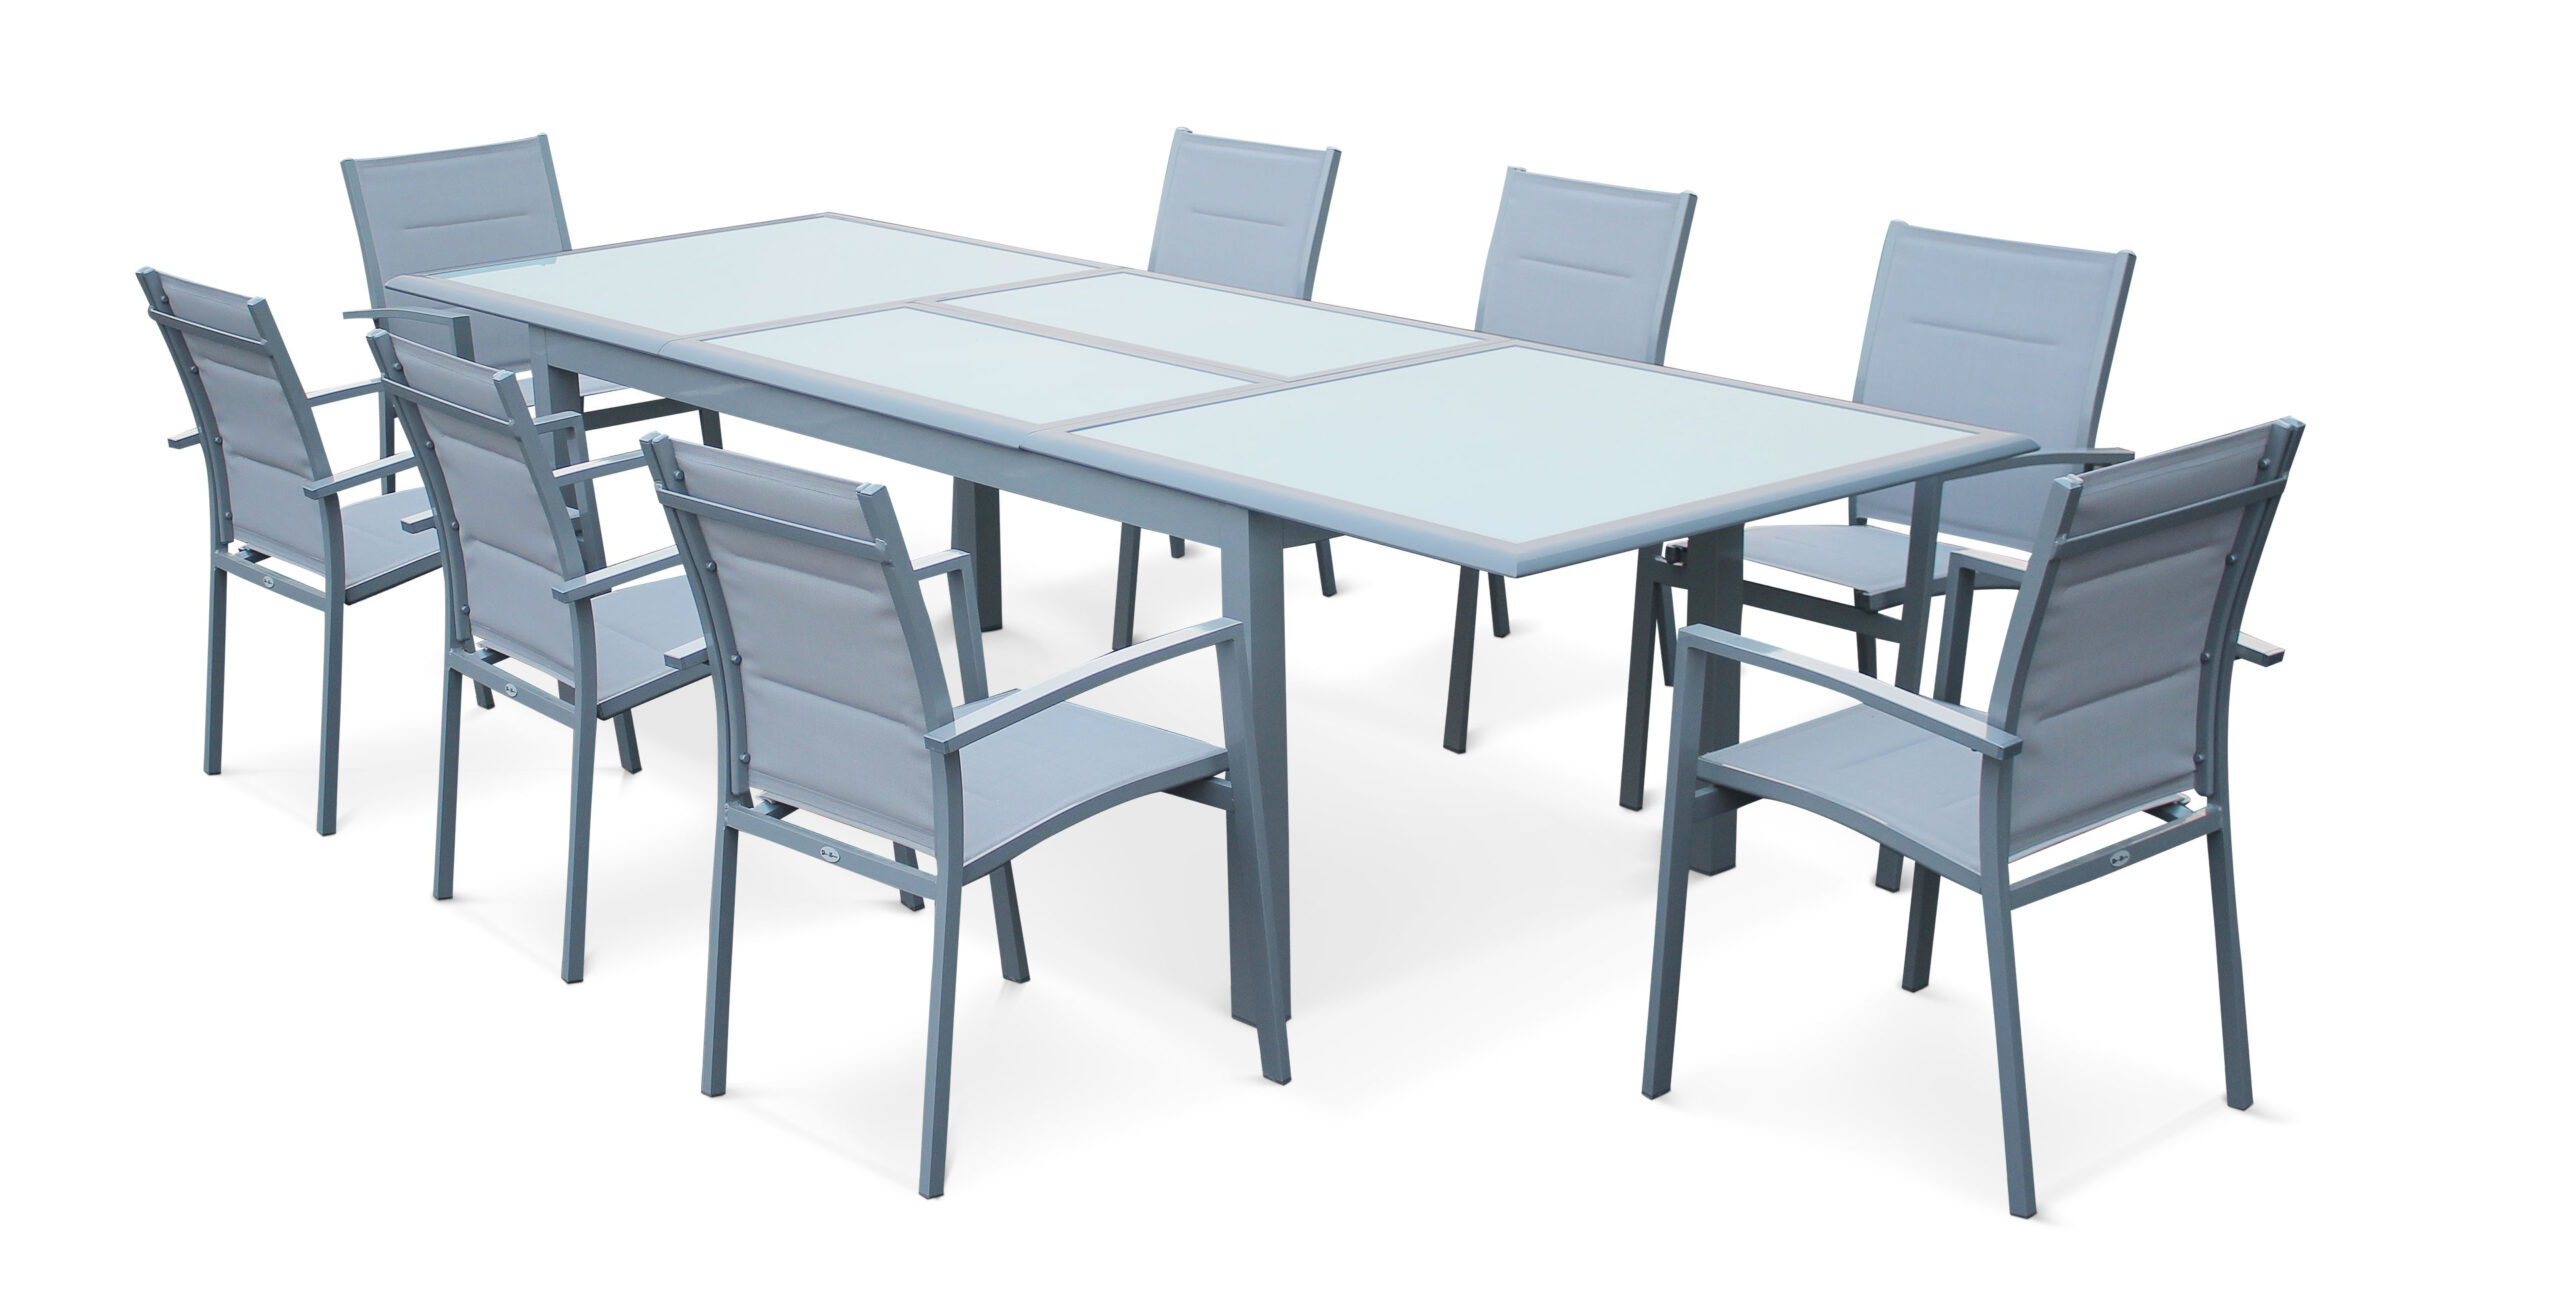 Table De Jardin Aluminium Table De Jardin Aluminium Extensible